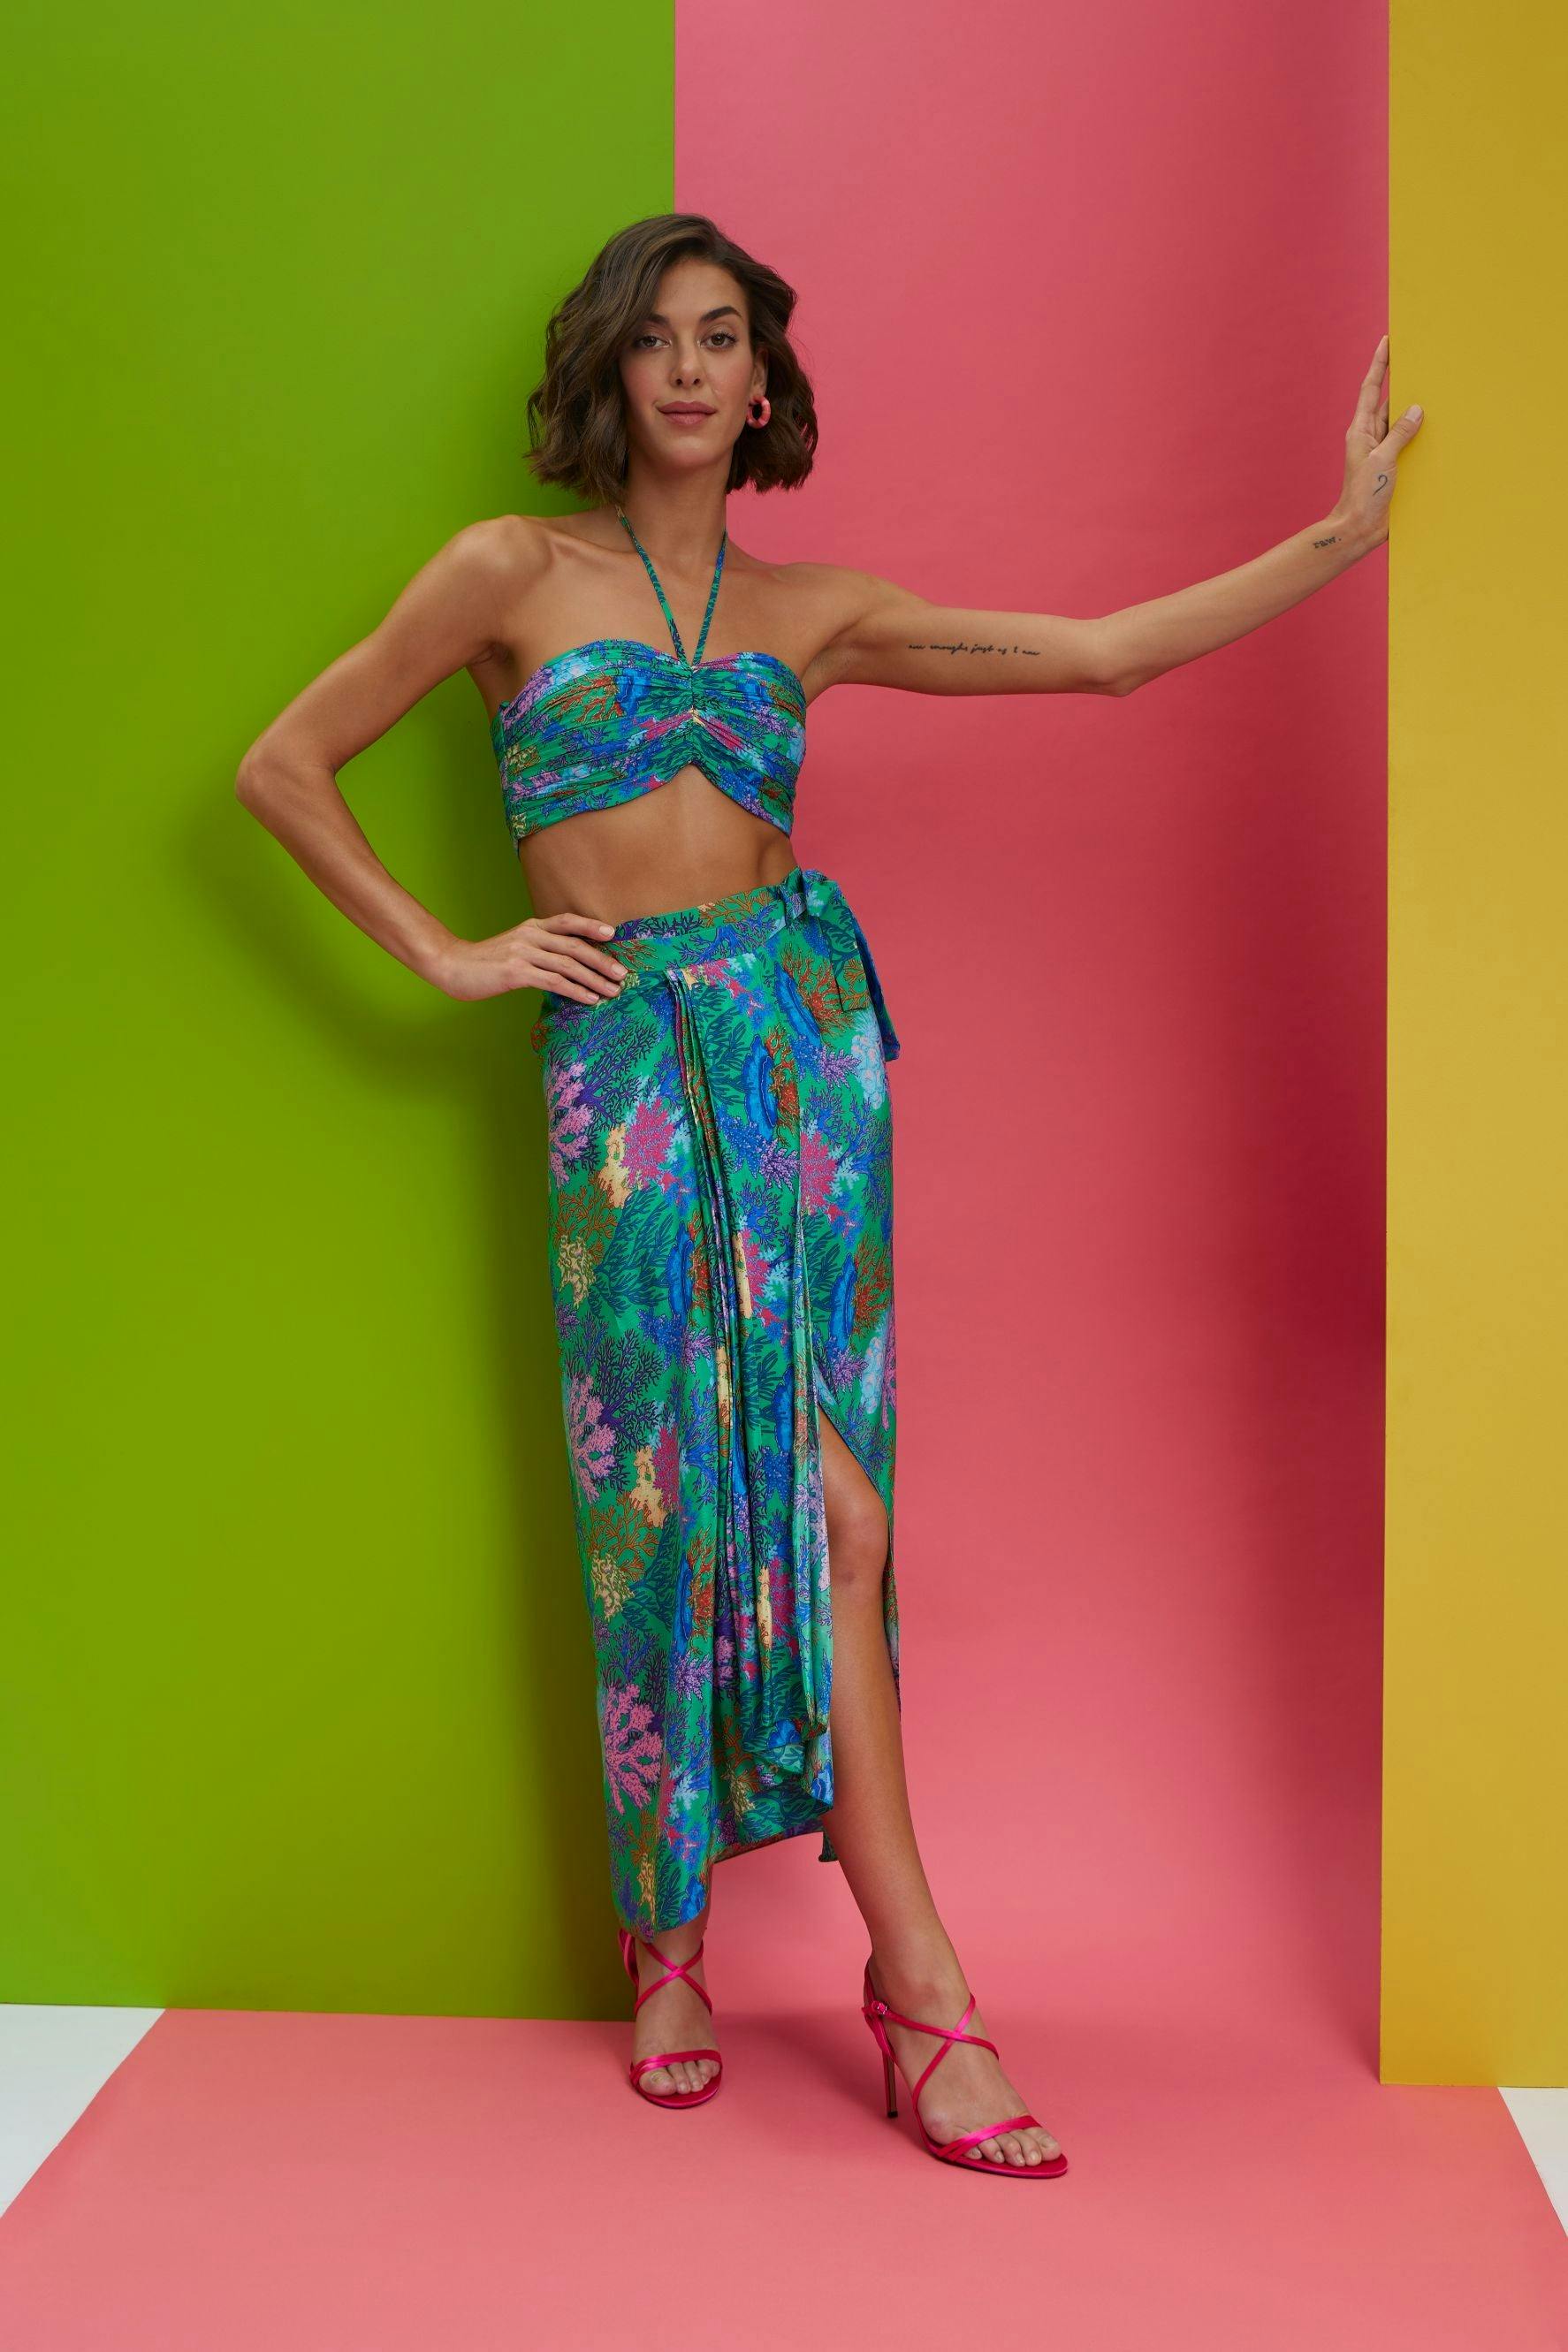 paradise - Wrap Around Skirt With Bustier, a product by Nautanky